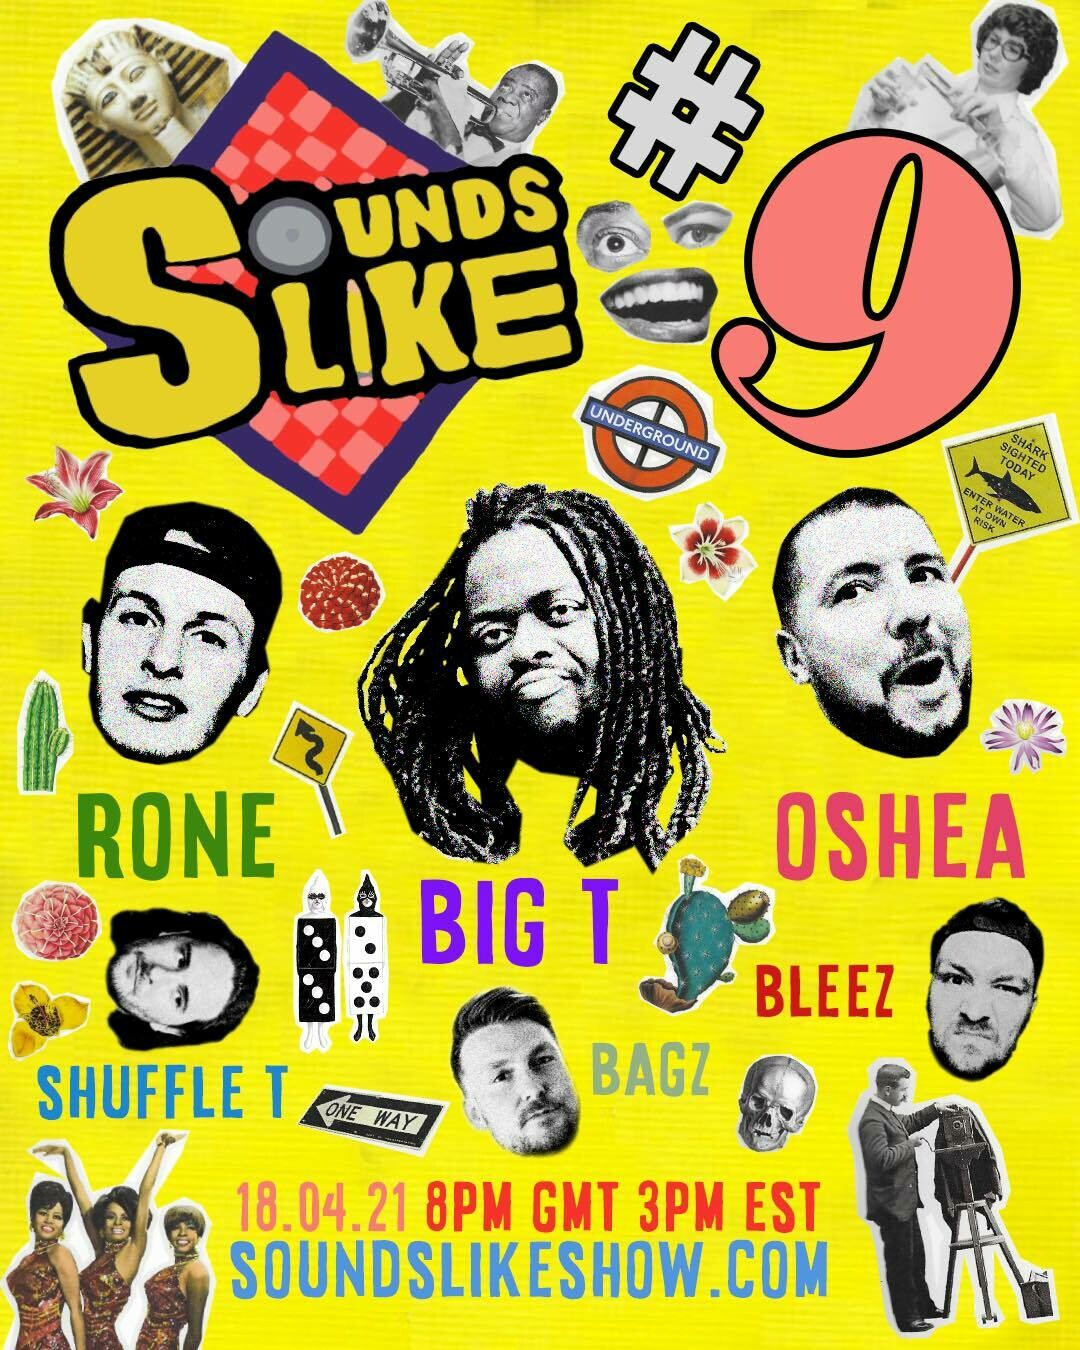 Sounds Like Episode 9 UNCUT with Oshea, Big T and Rone